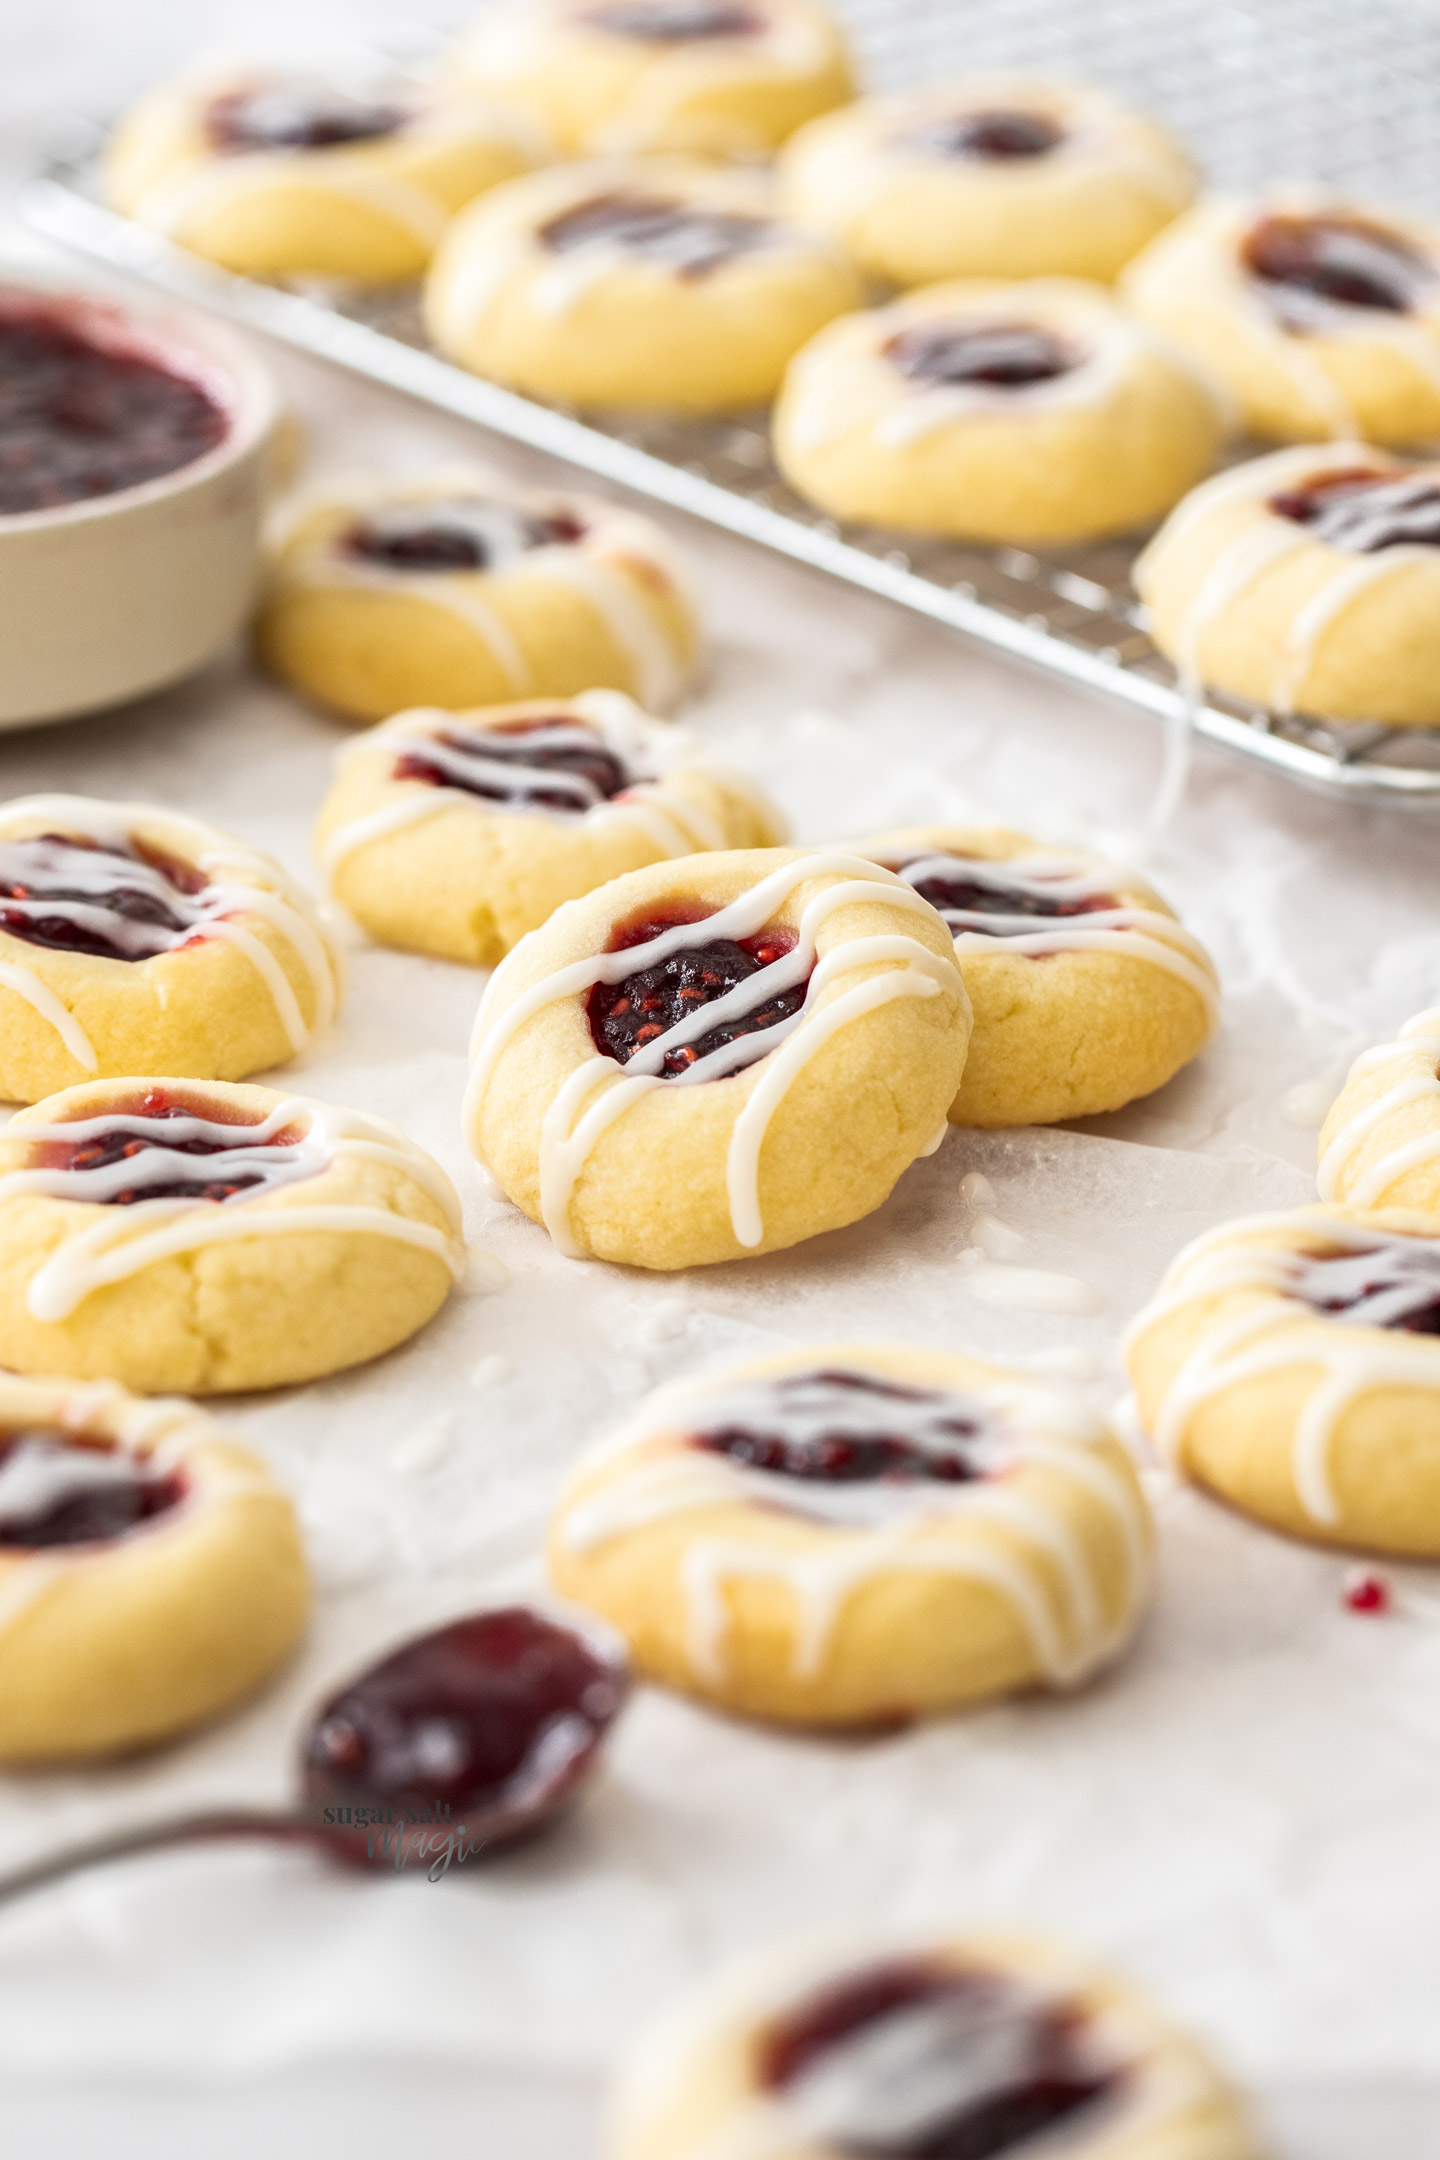 A batch of jam thumbprint cookies on a sheet of baking paper.